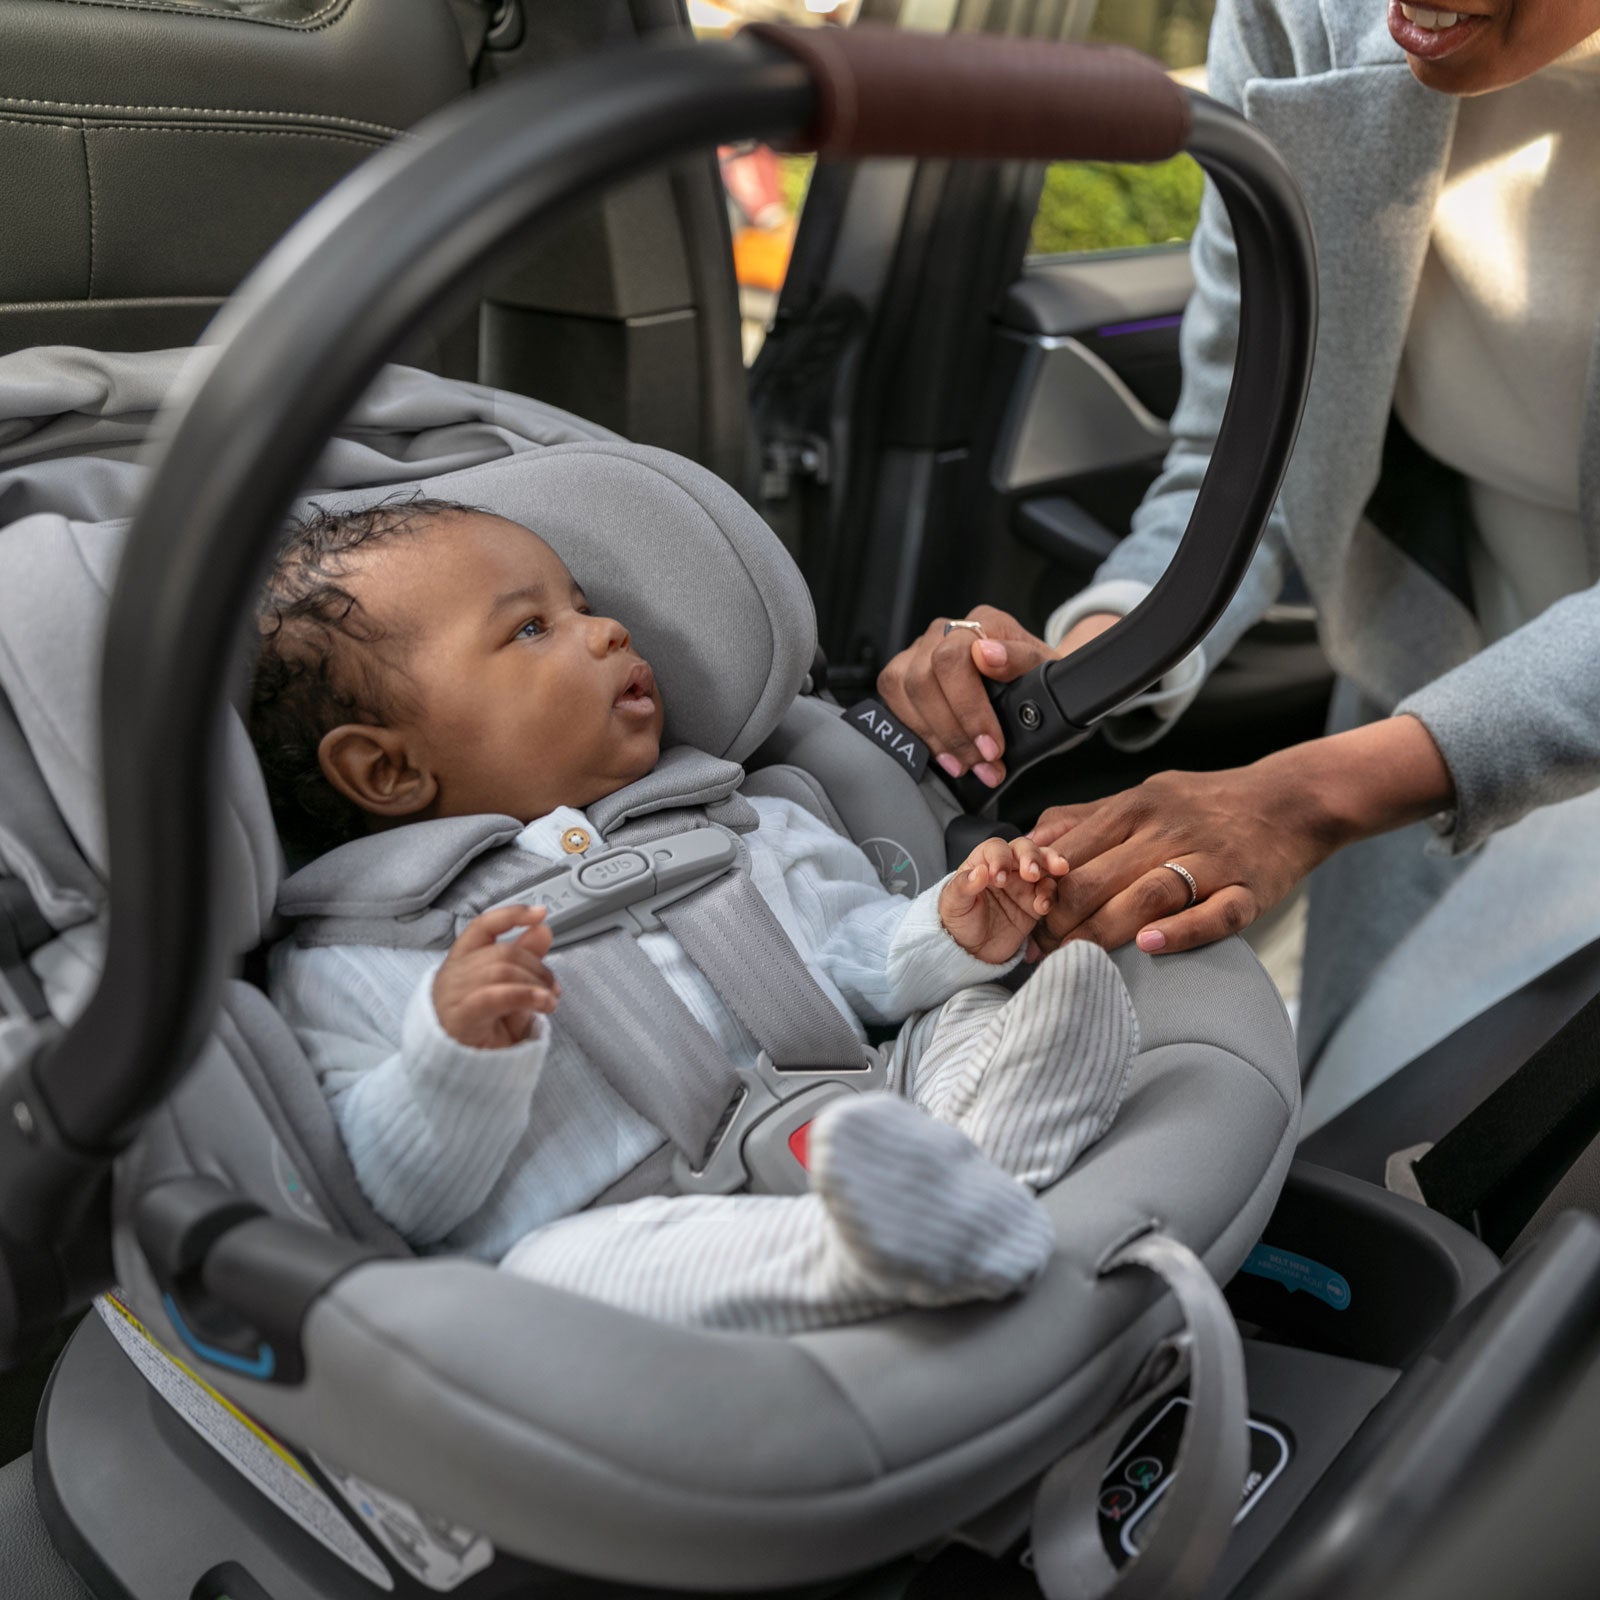 Mom puts baby in vehicle in UPPAbaby ARIA Infant Car Seat - ANTHONY (Light Grey)